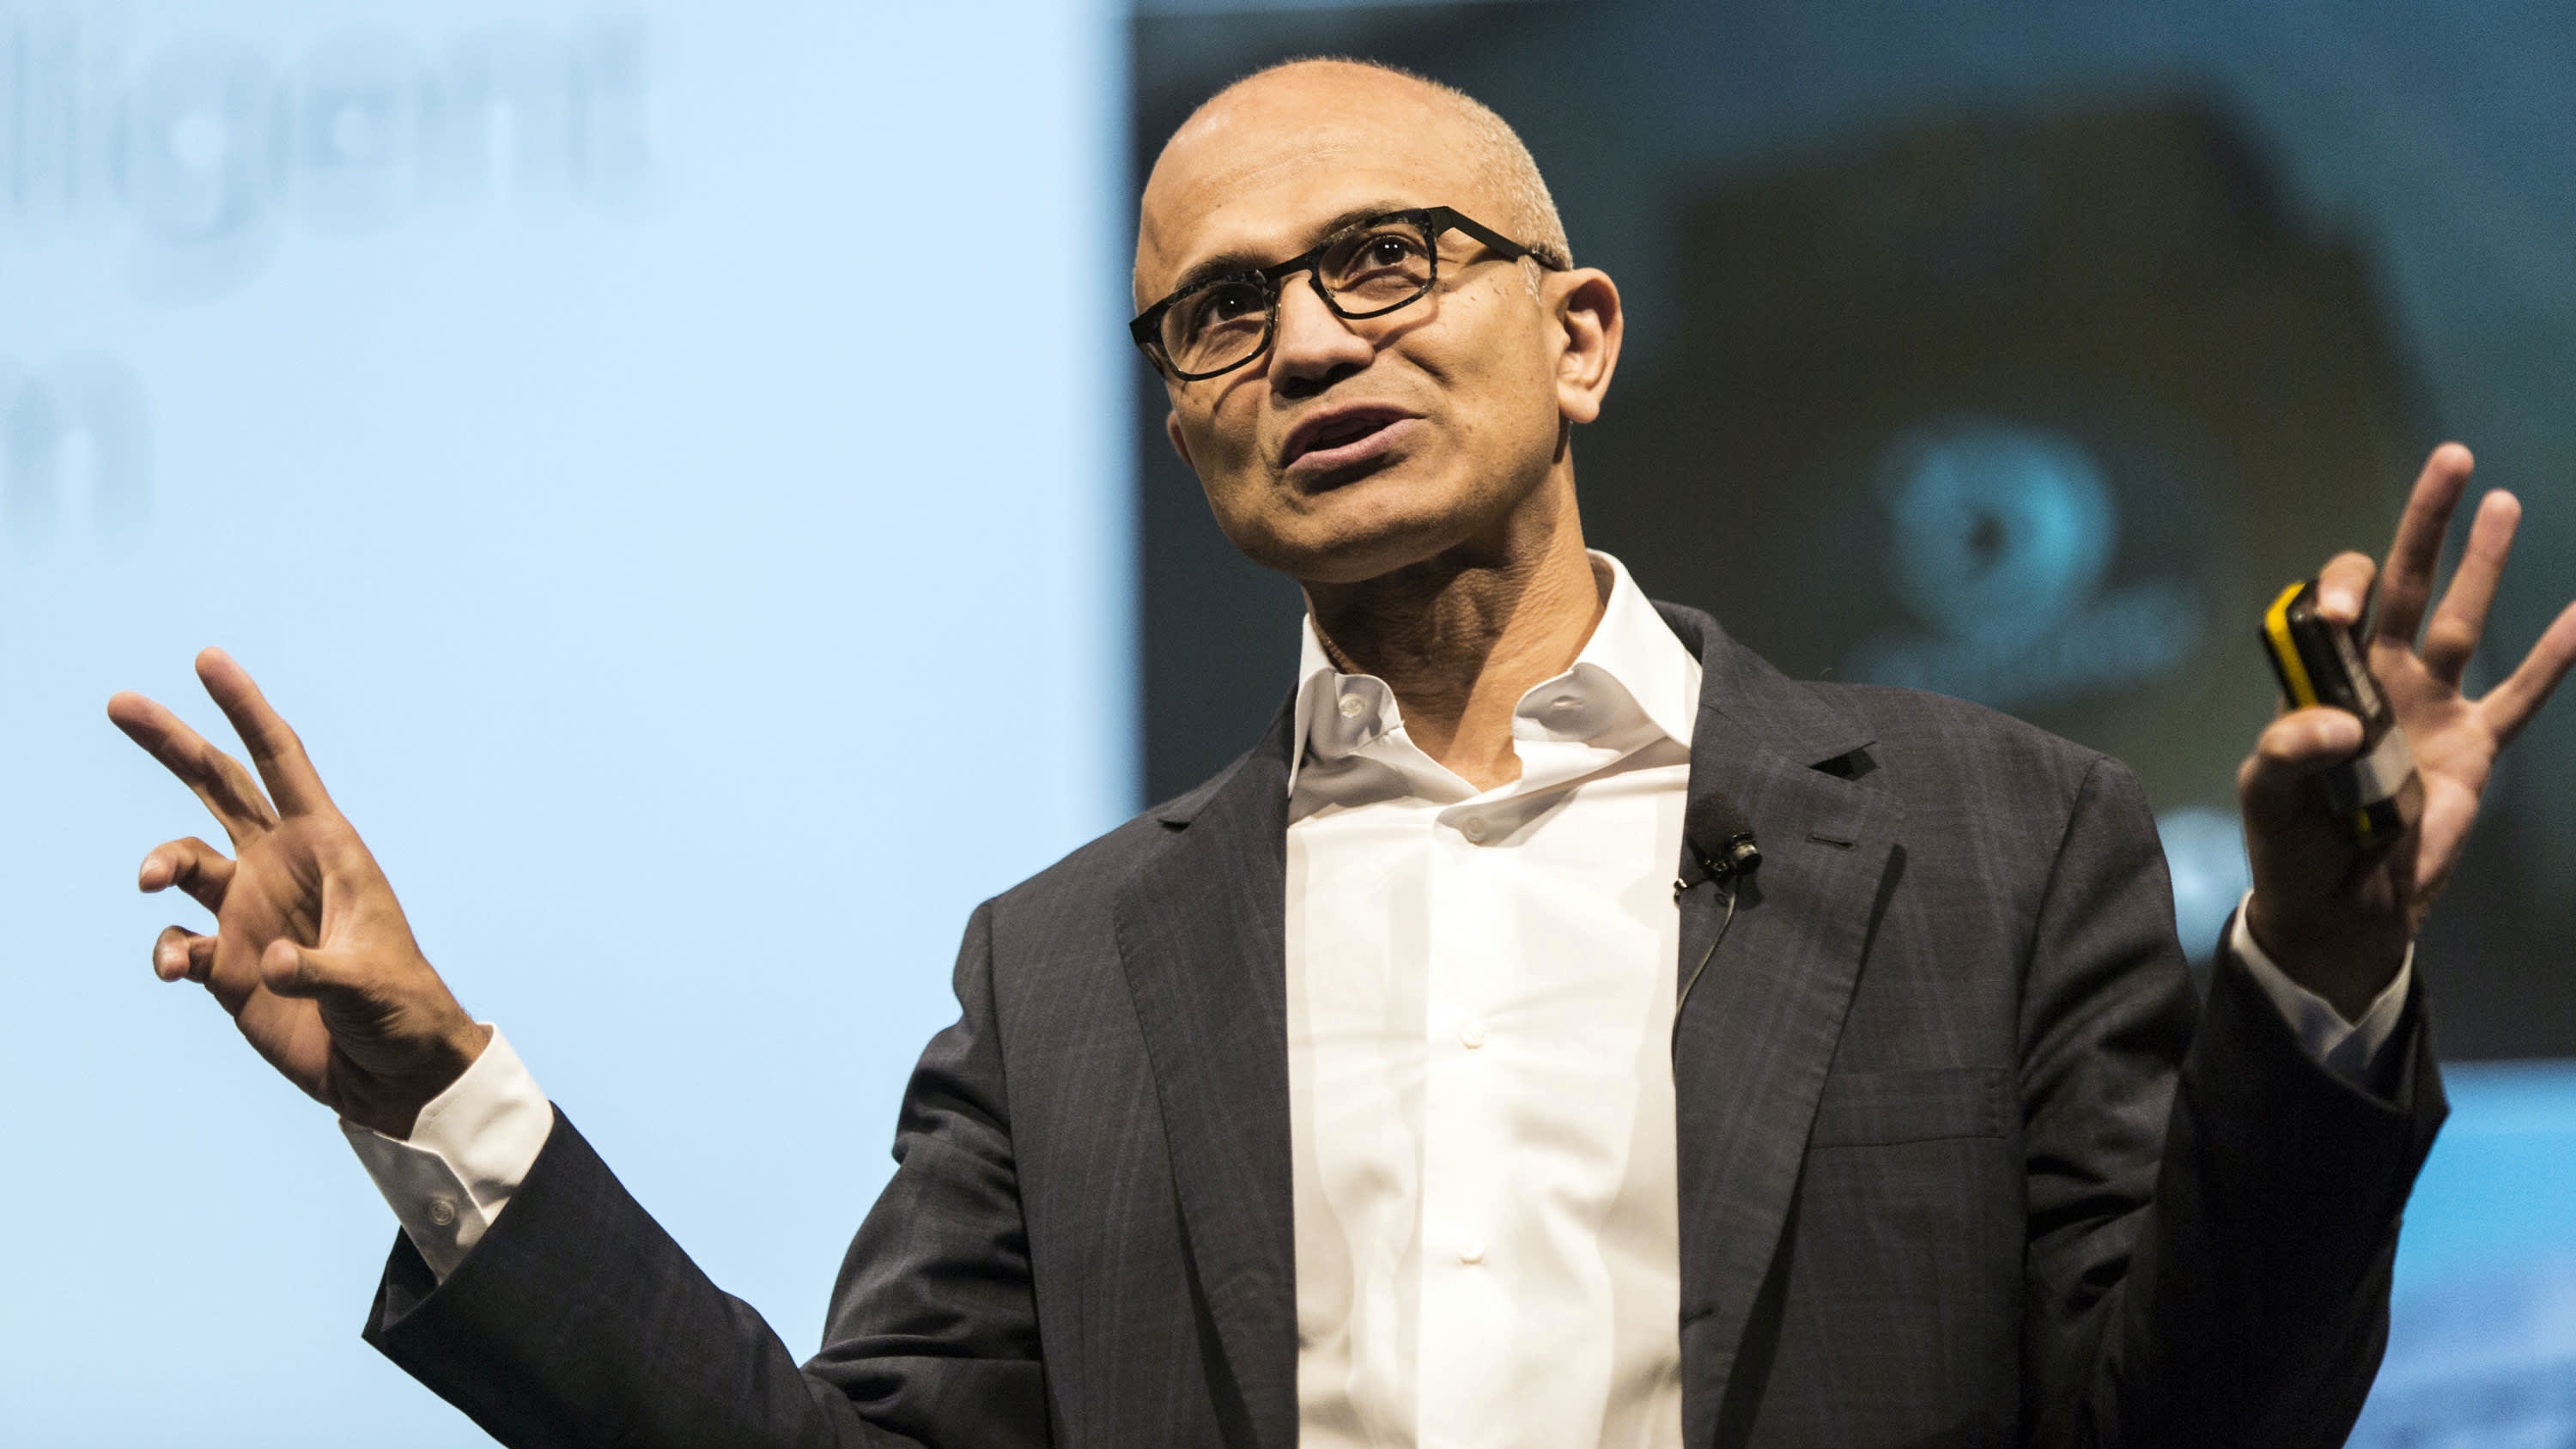 Microsoft sets record for biggest tech deal ever, topping Dell-EMC merger in 2016